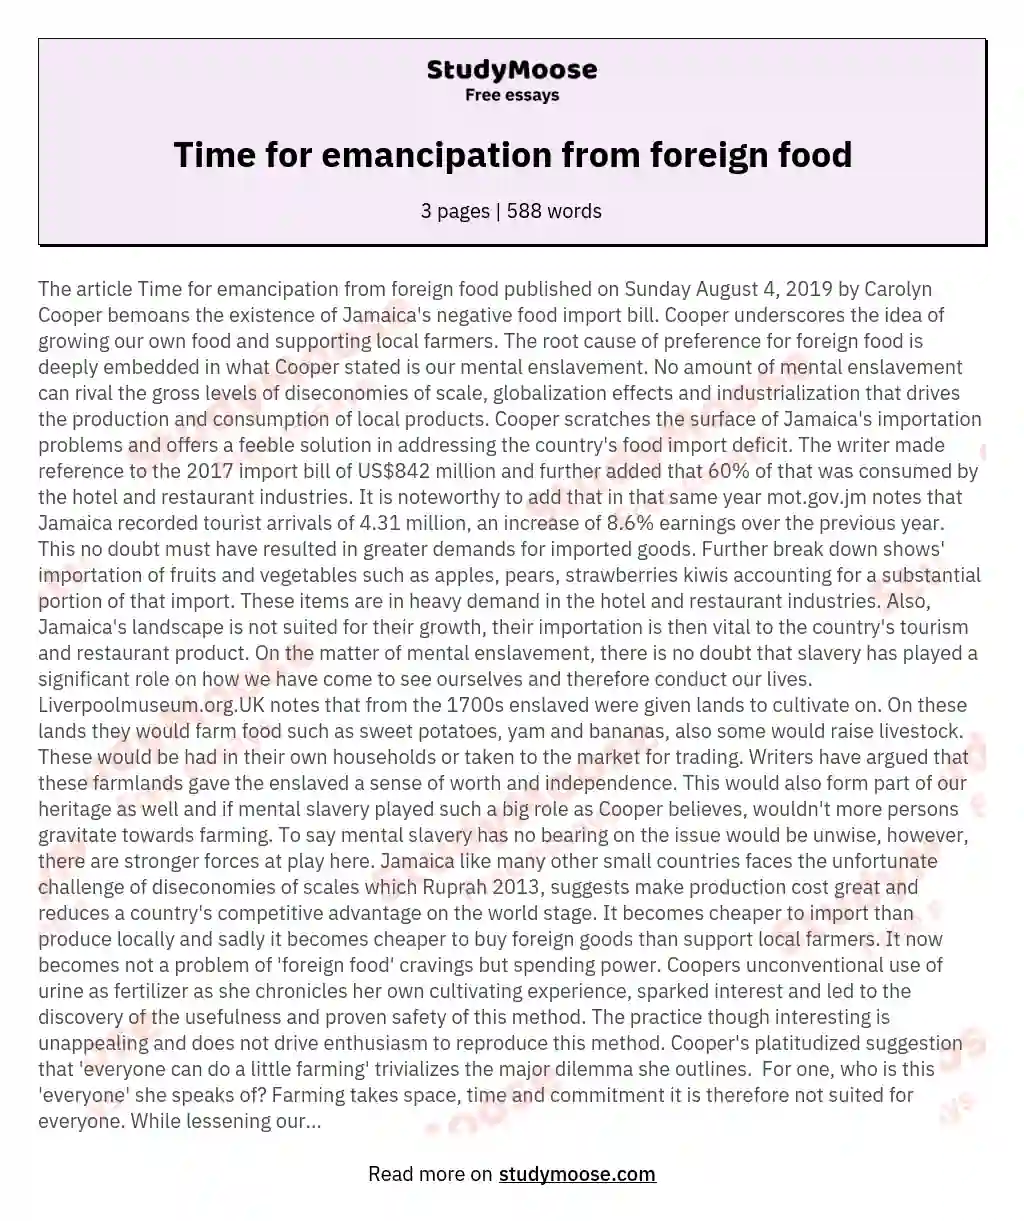 Time for emancipation from foreign food essay